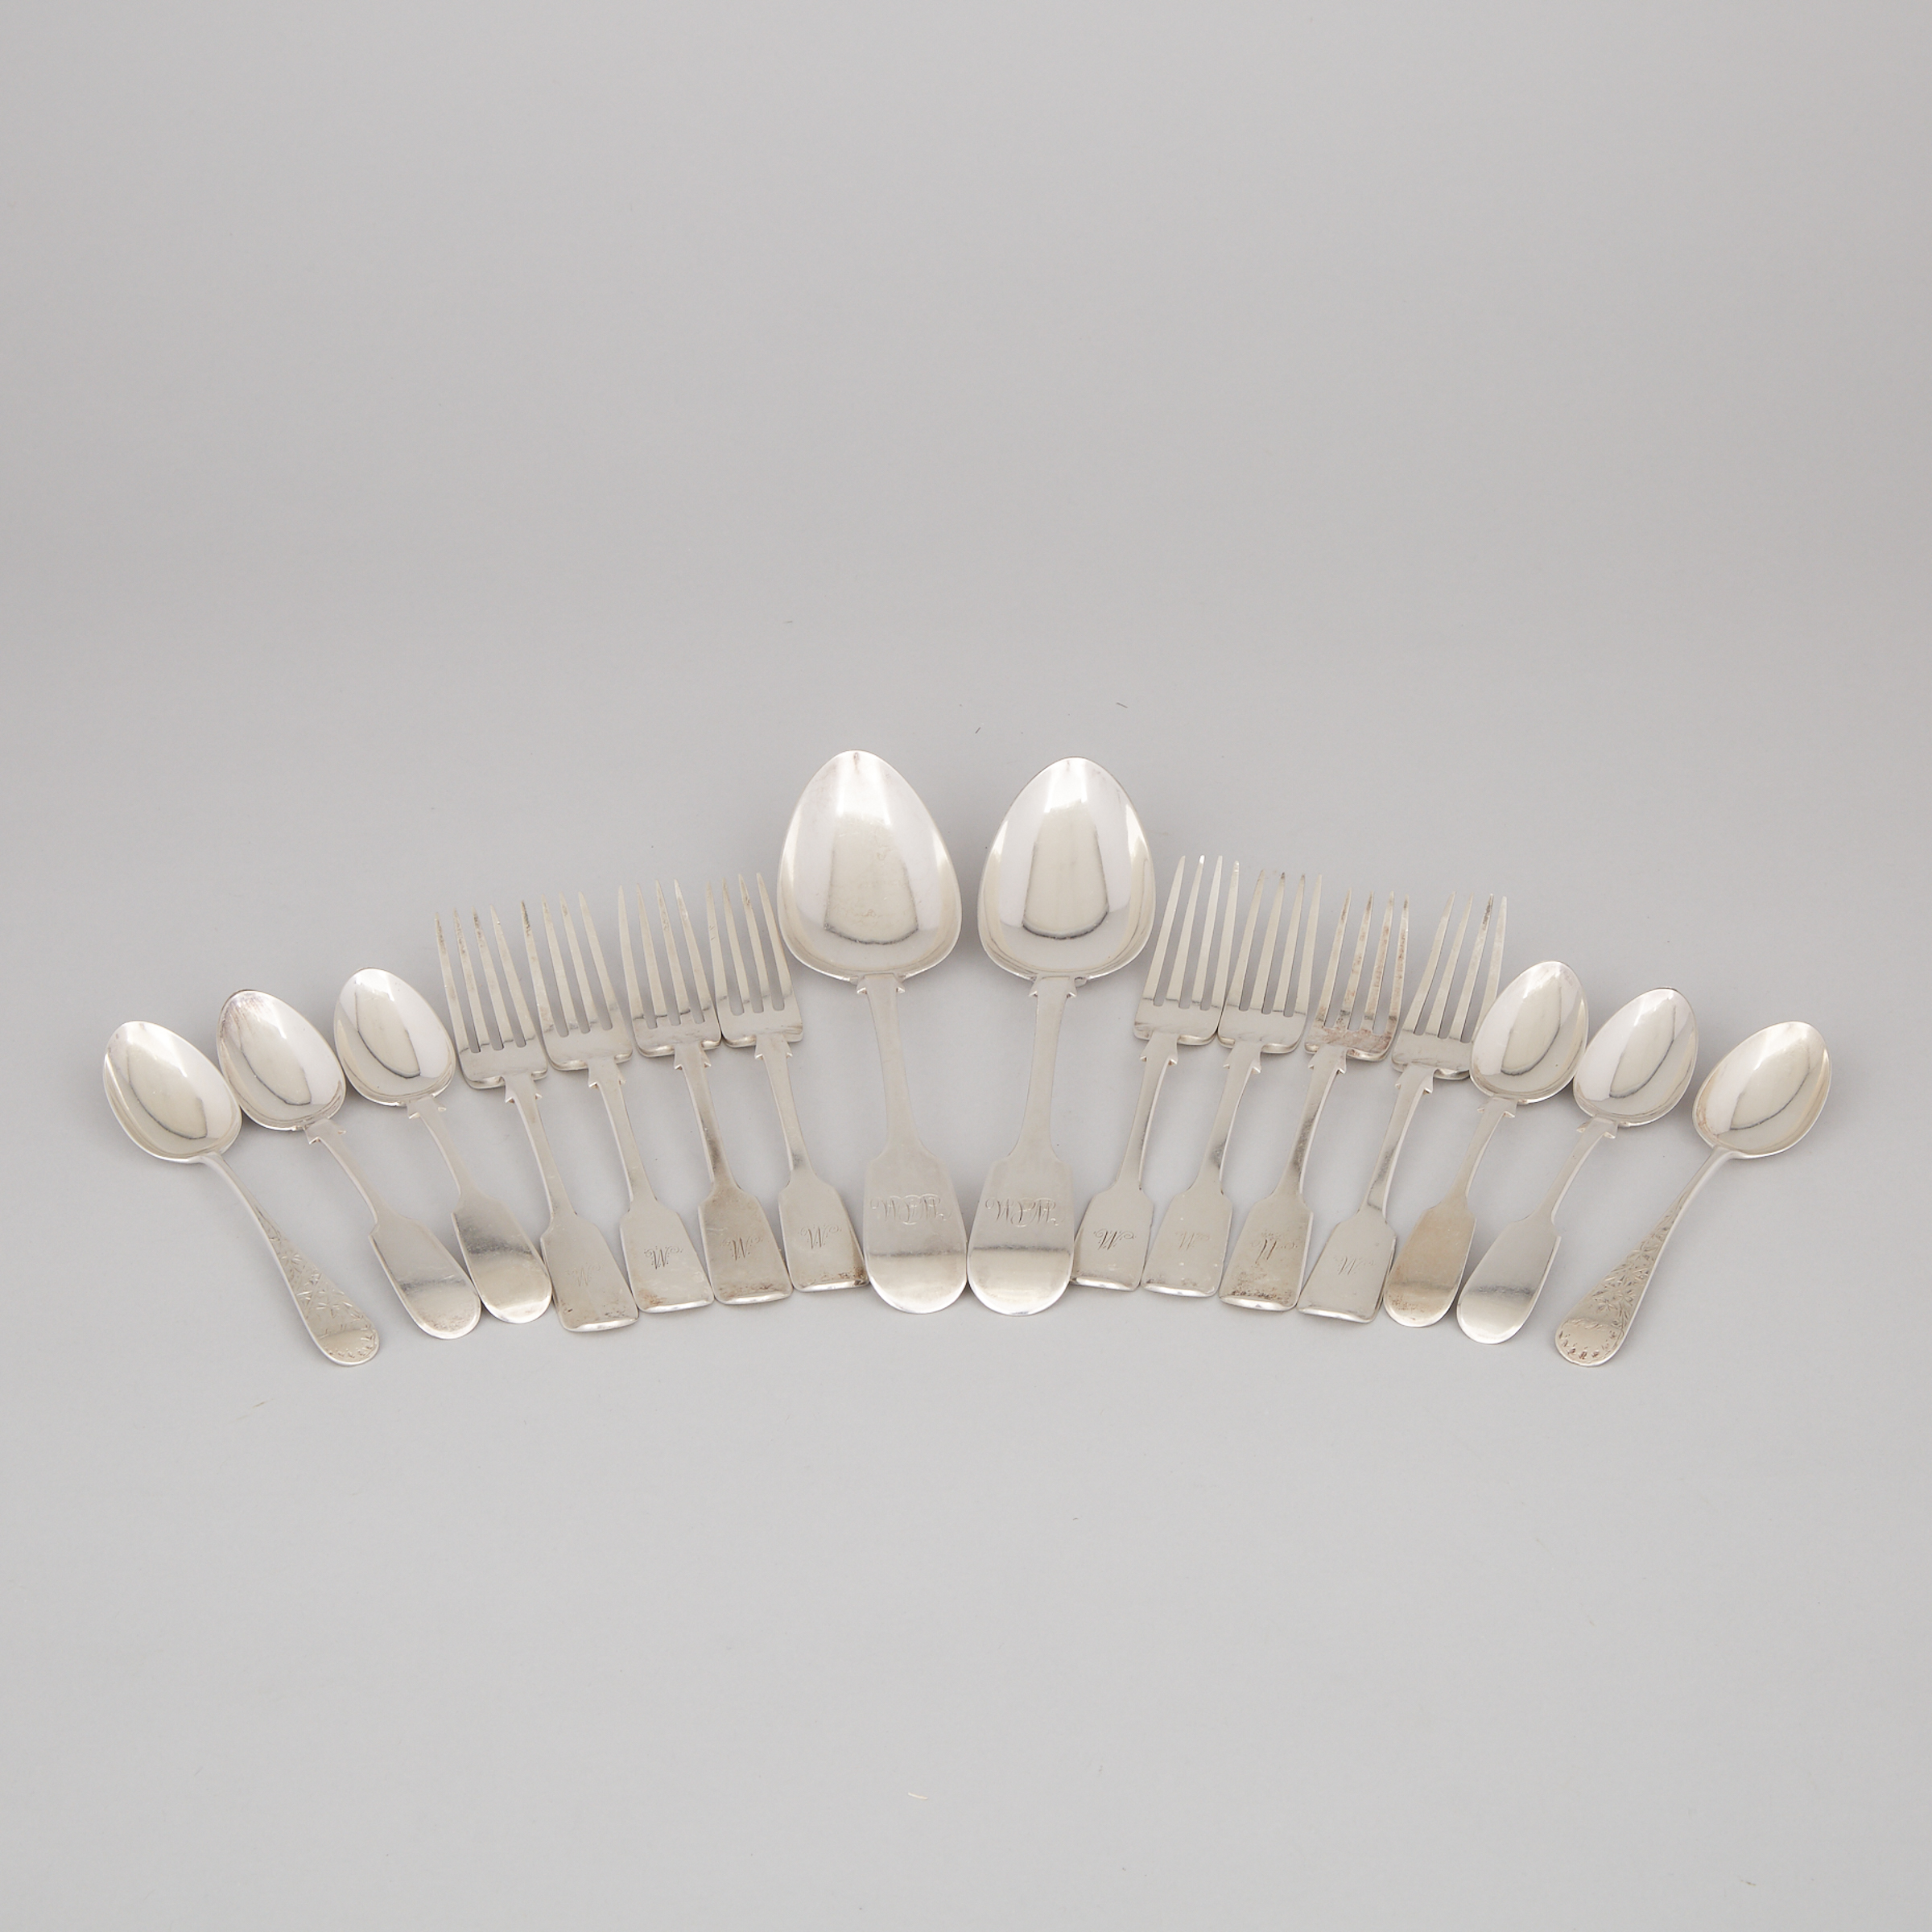 Group of Canadian Silver Mainly Fiddle Pattern Flatware, second half of the 19th century